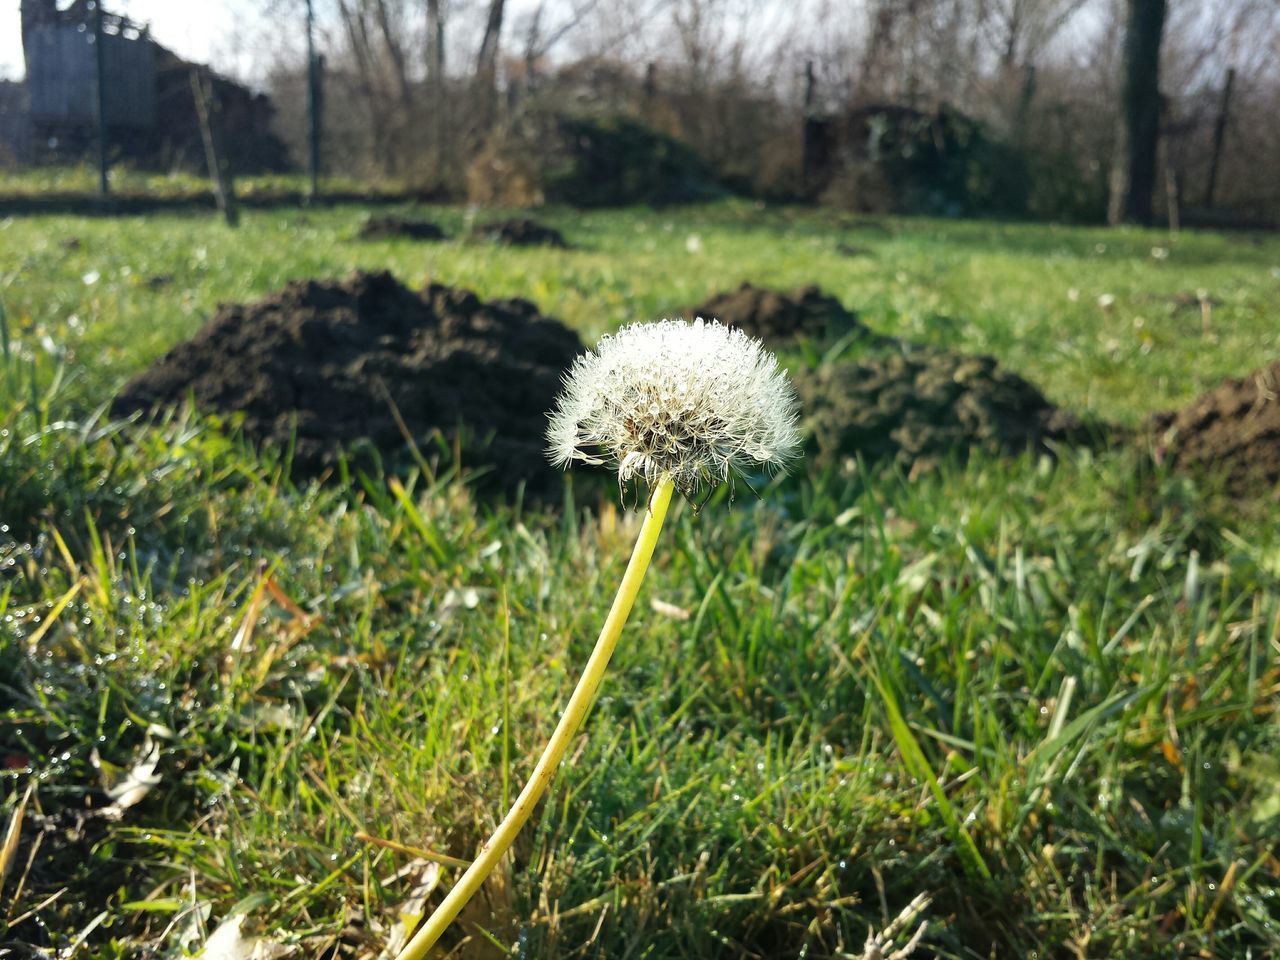 flower, dandelion, growth, fragility, freshness, field, flower head, grass, beauty in nature, nature, white color, wildflower, focus on foreground, stem, plant, single flower, uncultivated, blooming, in bloom, close-up